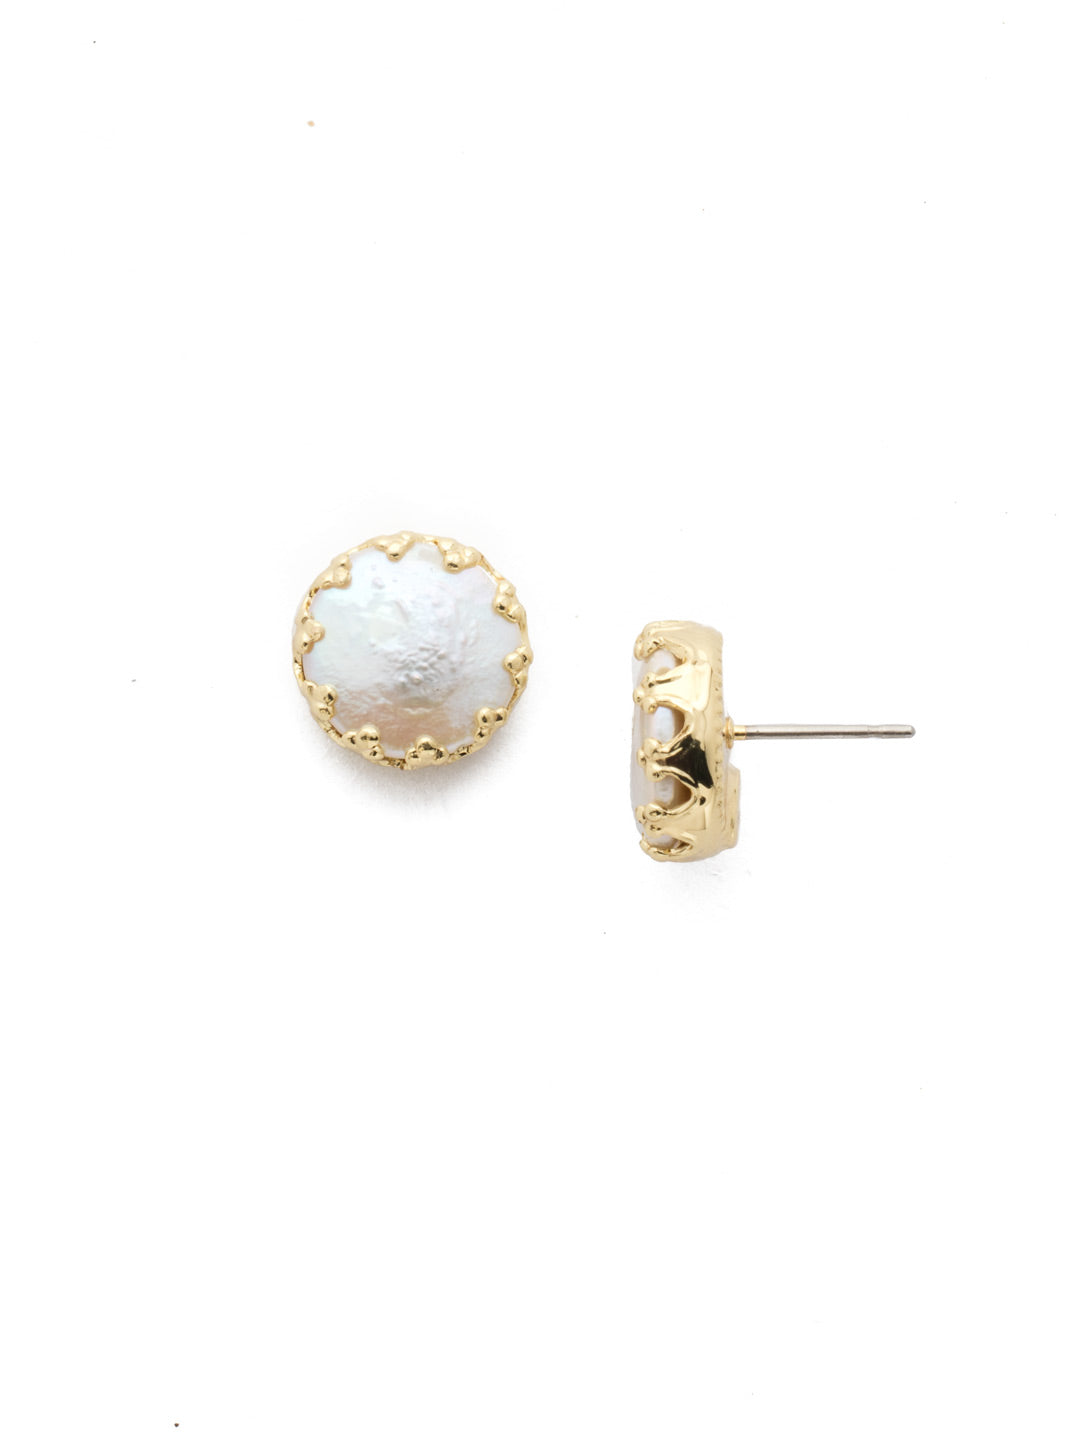 Isabella Stud Earrings - EEC15BGPLP - <p>Cute as a button! These post earrings feature a circular button pearl inside a decorative metal setting. From Sorrelli's Polished Pearl collection in our Bright Gold-tone finish.</p>